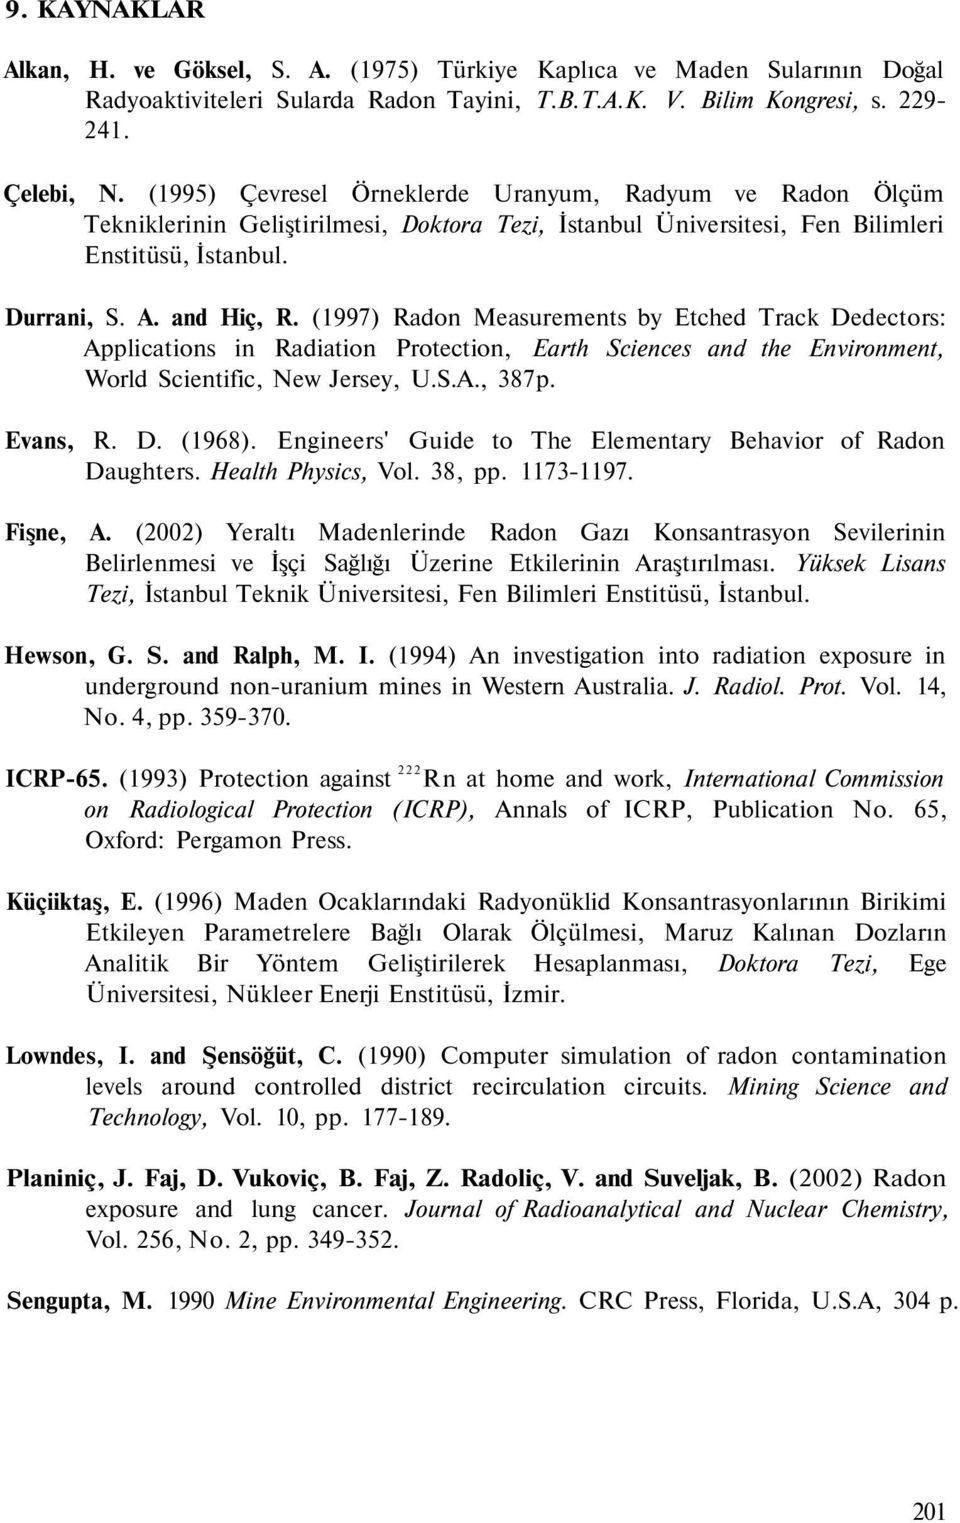 (1997) Radon Measurements by Etched Track Dedectors: Applications in Radiation Protection, Earth Sciences and the Environment, World Scientific, New Jersey, U.S.A., 387p. Evans, R. D. (1968).